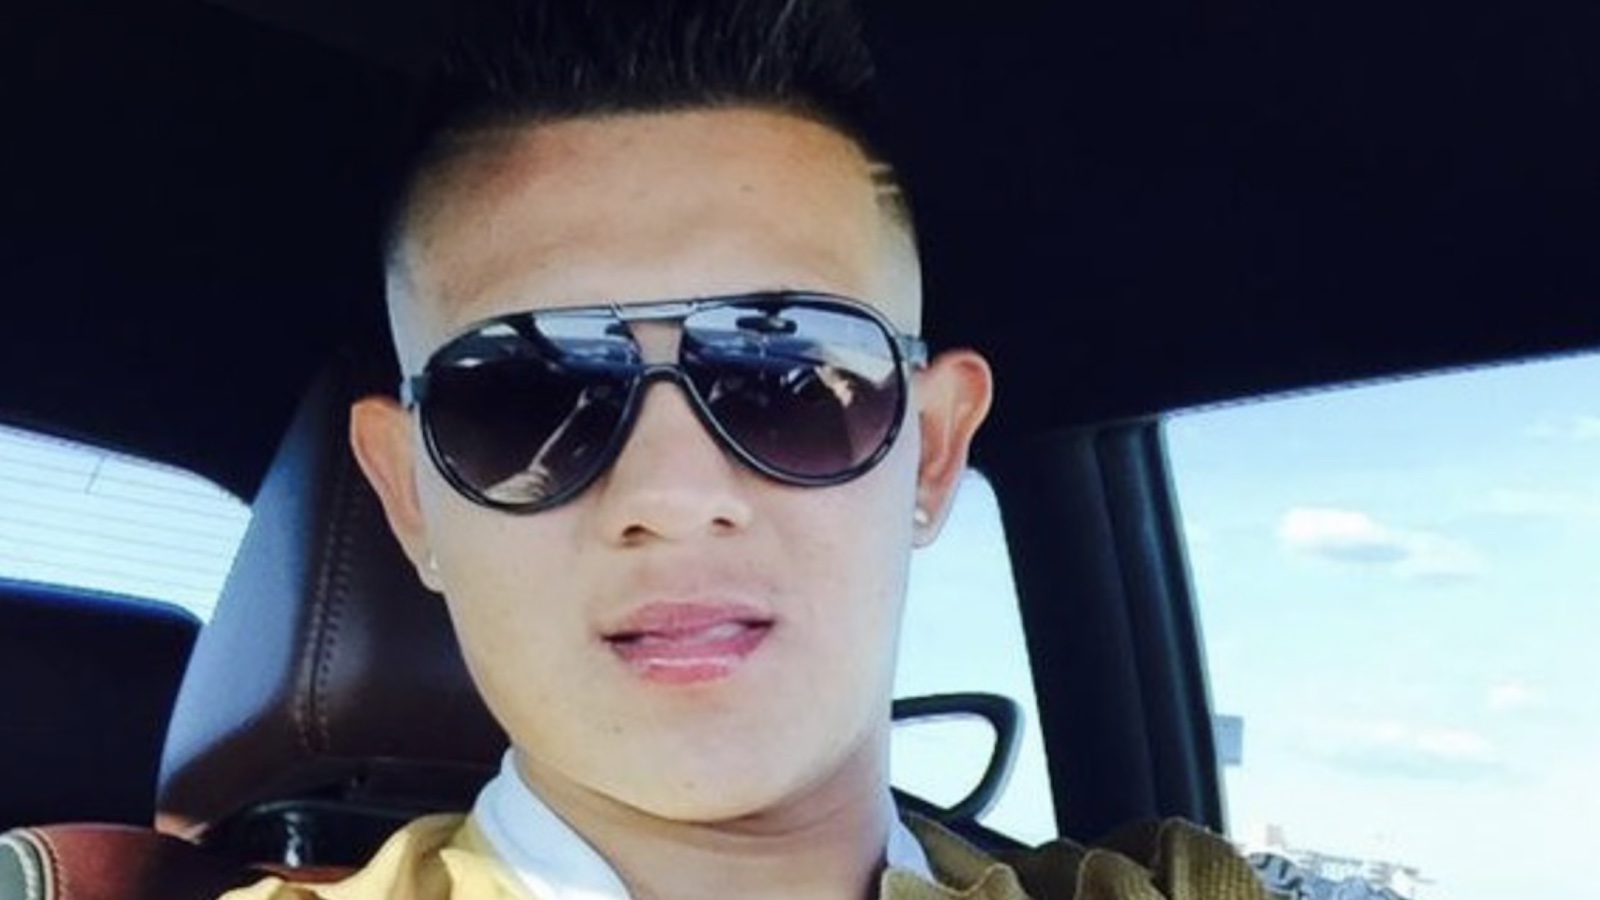 Julio Urias Domestic Violence Update: Cops pulled out Dodgers star